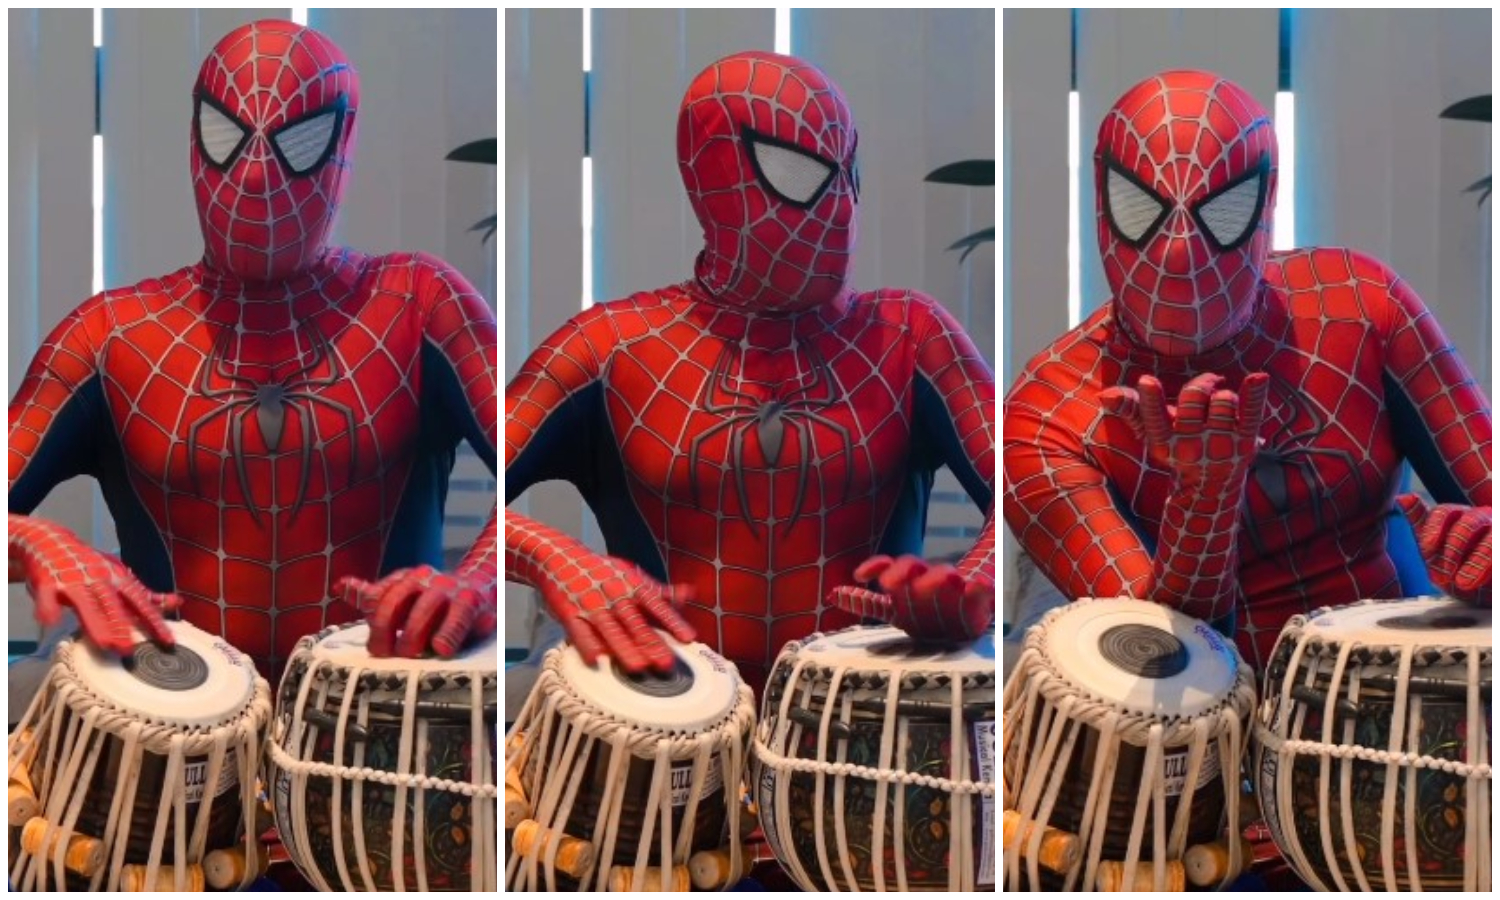 Playing Tabala In Spider Man costume